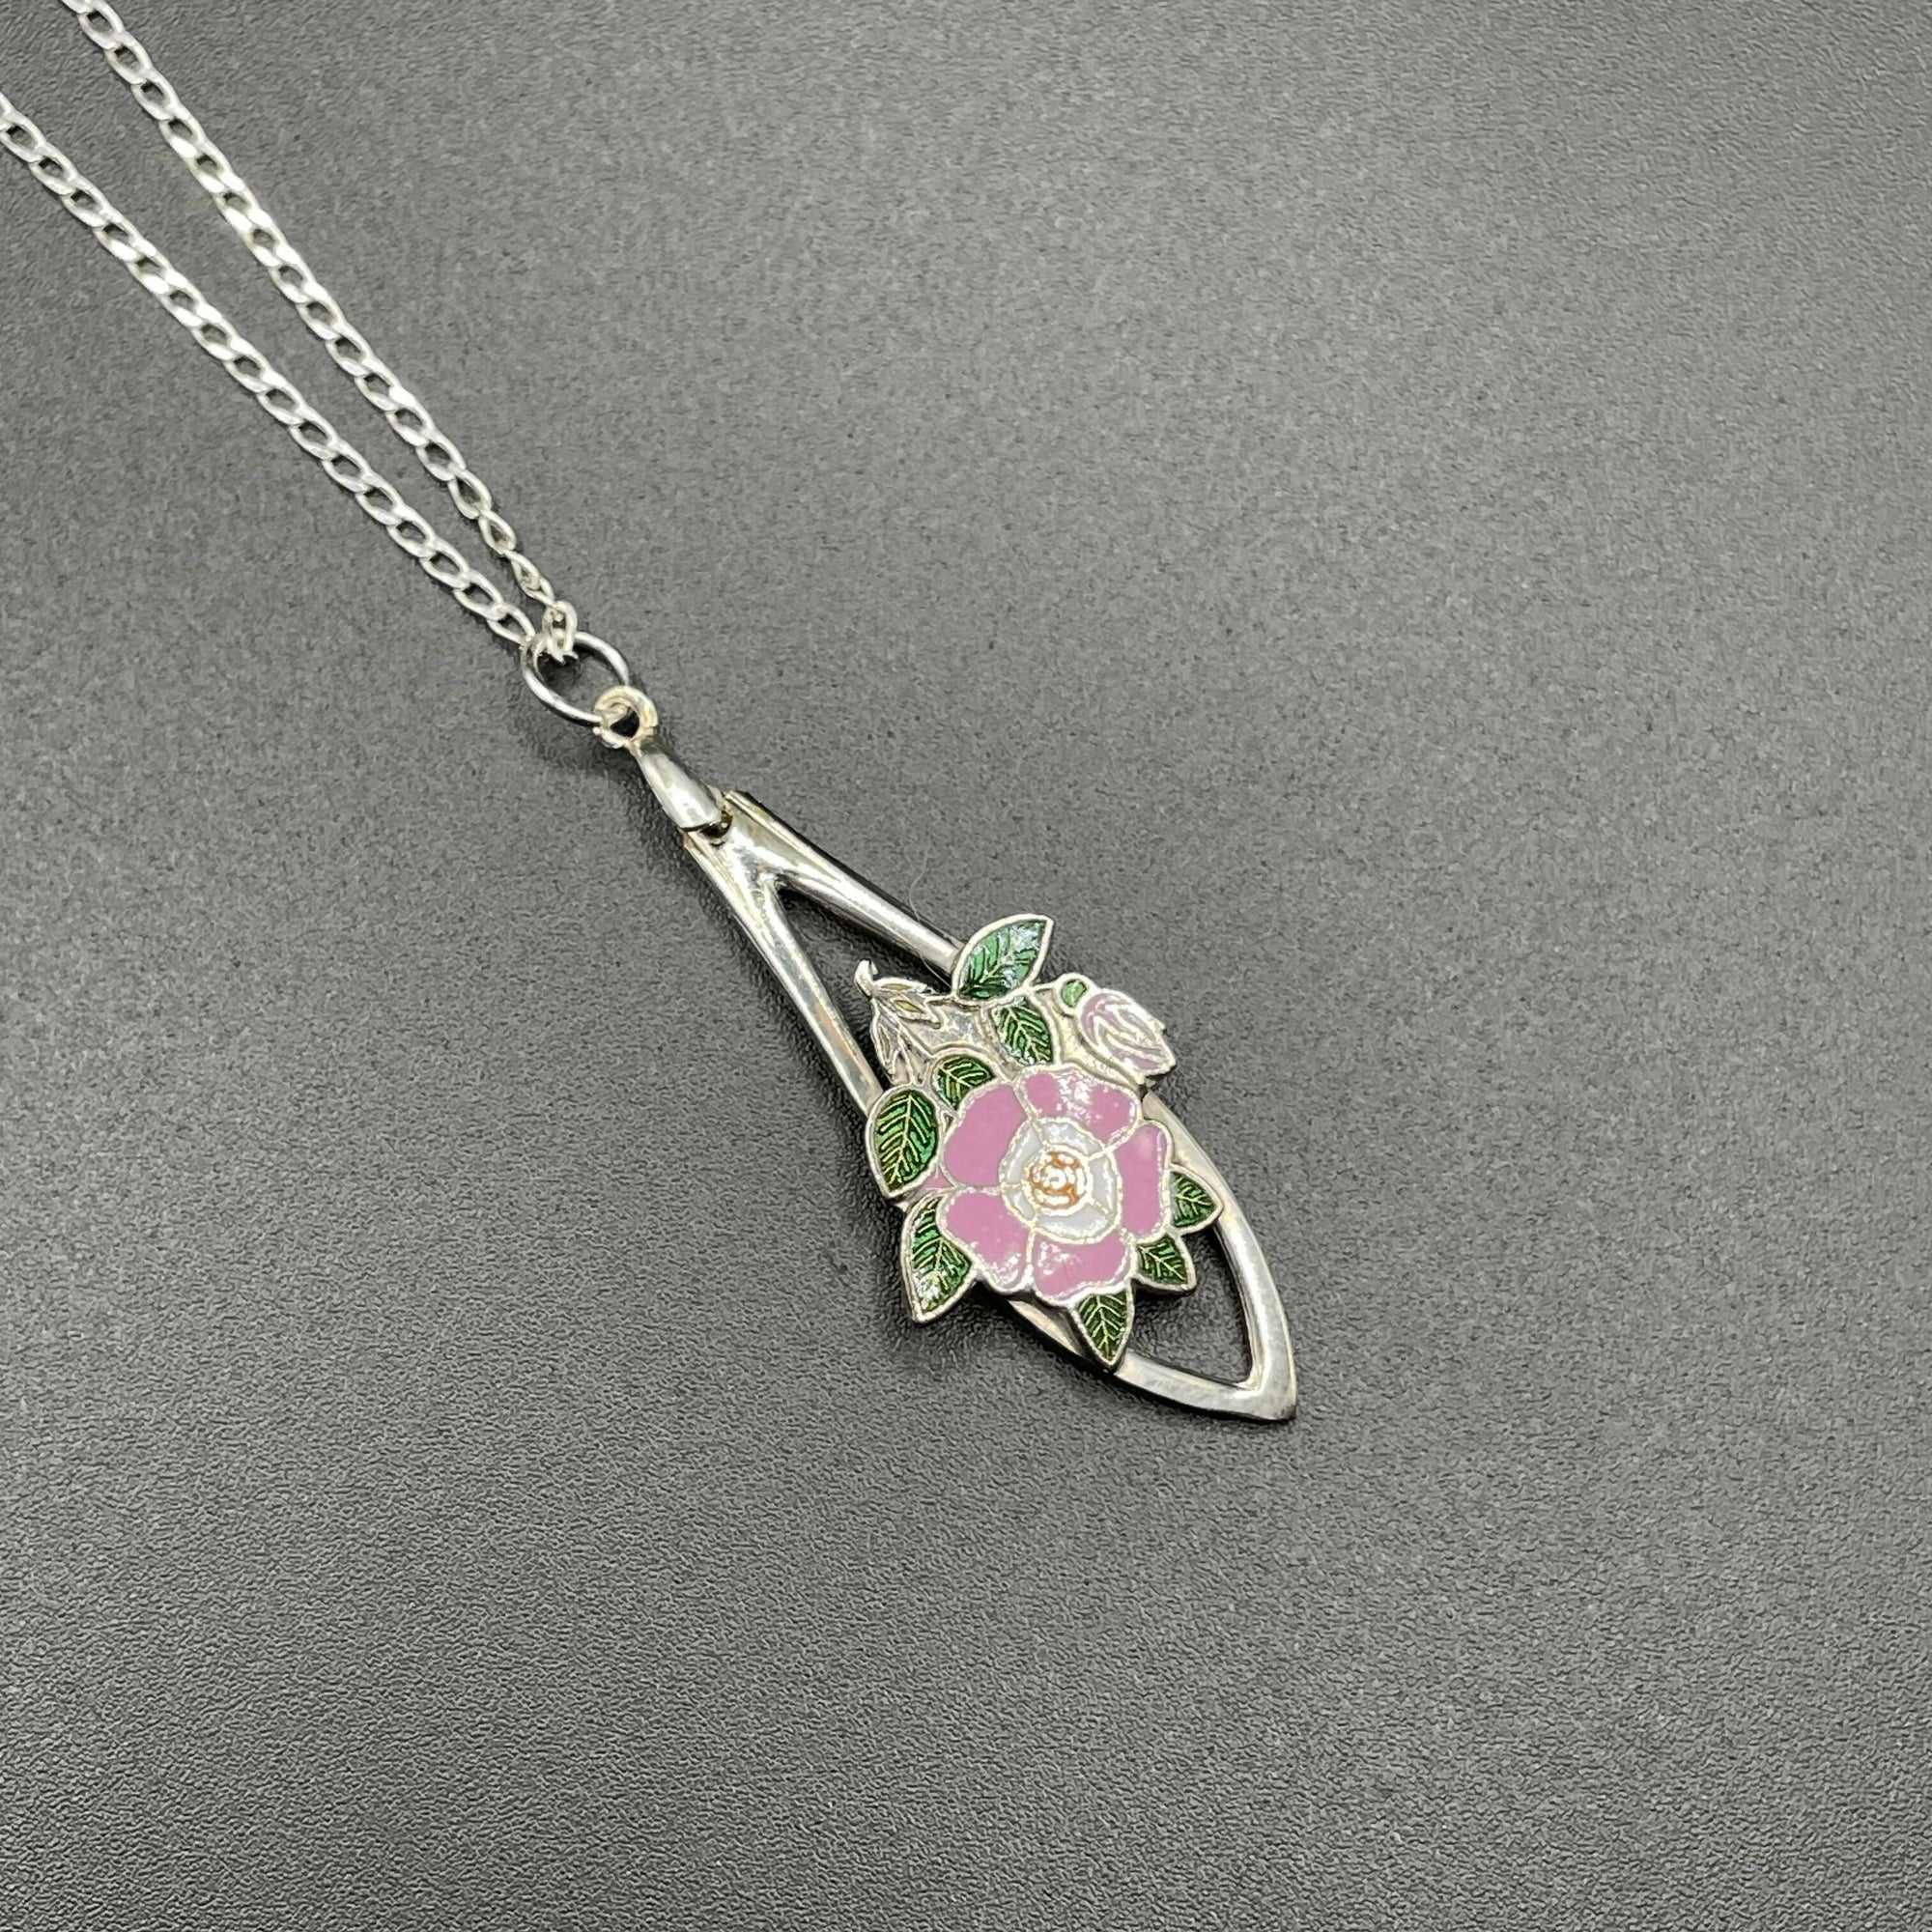 Repurposing By Glenna | Pink and Green Enamel Flower Pendant on 16" Sterling Silver Chain